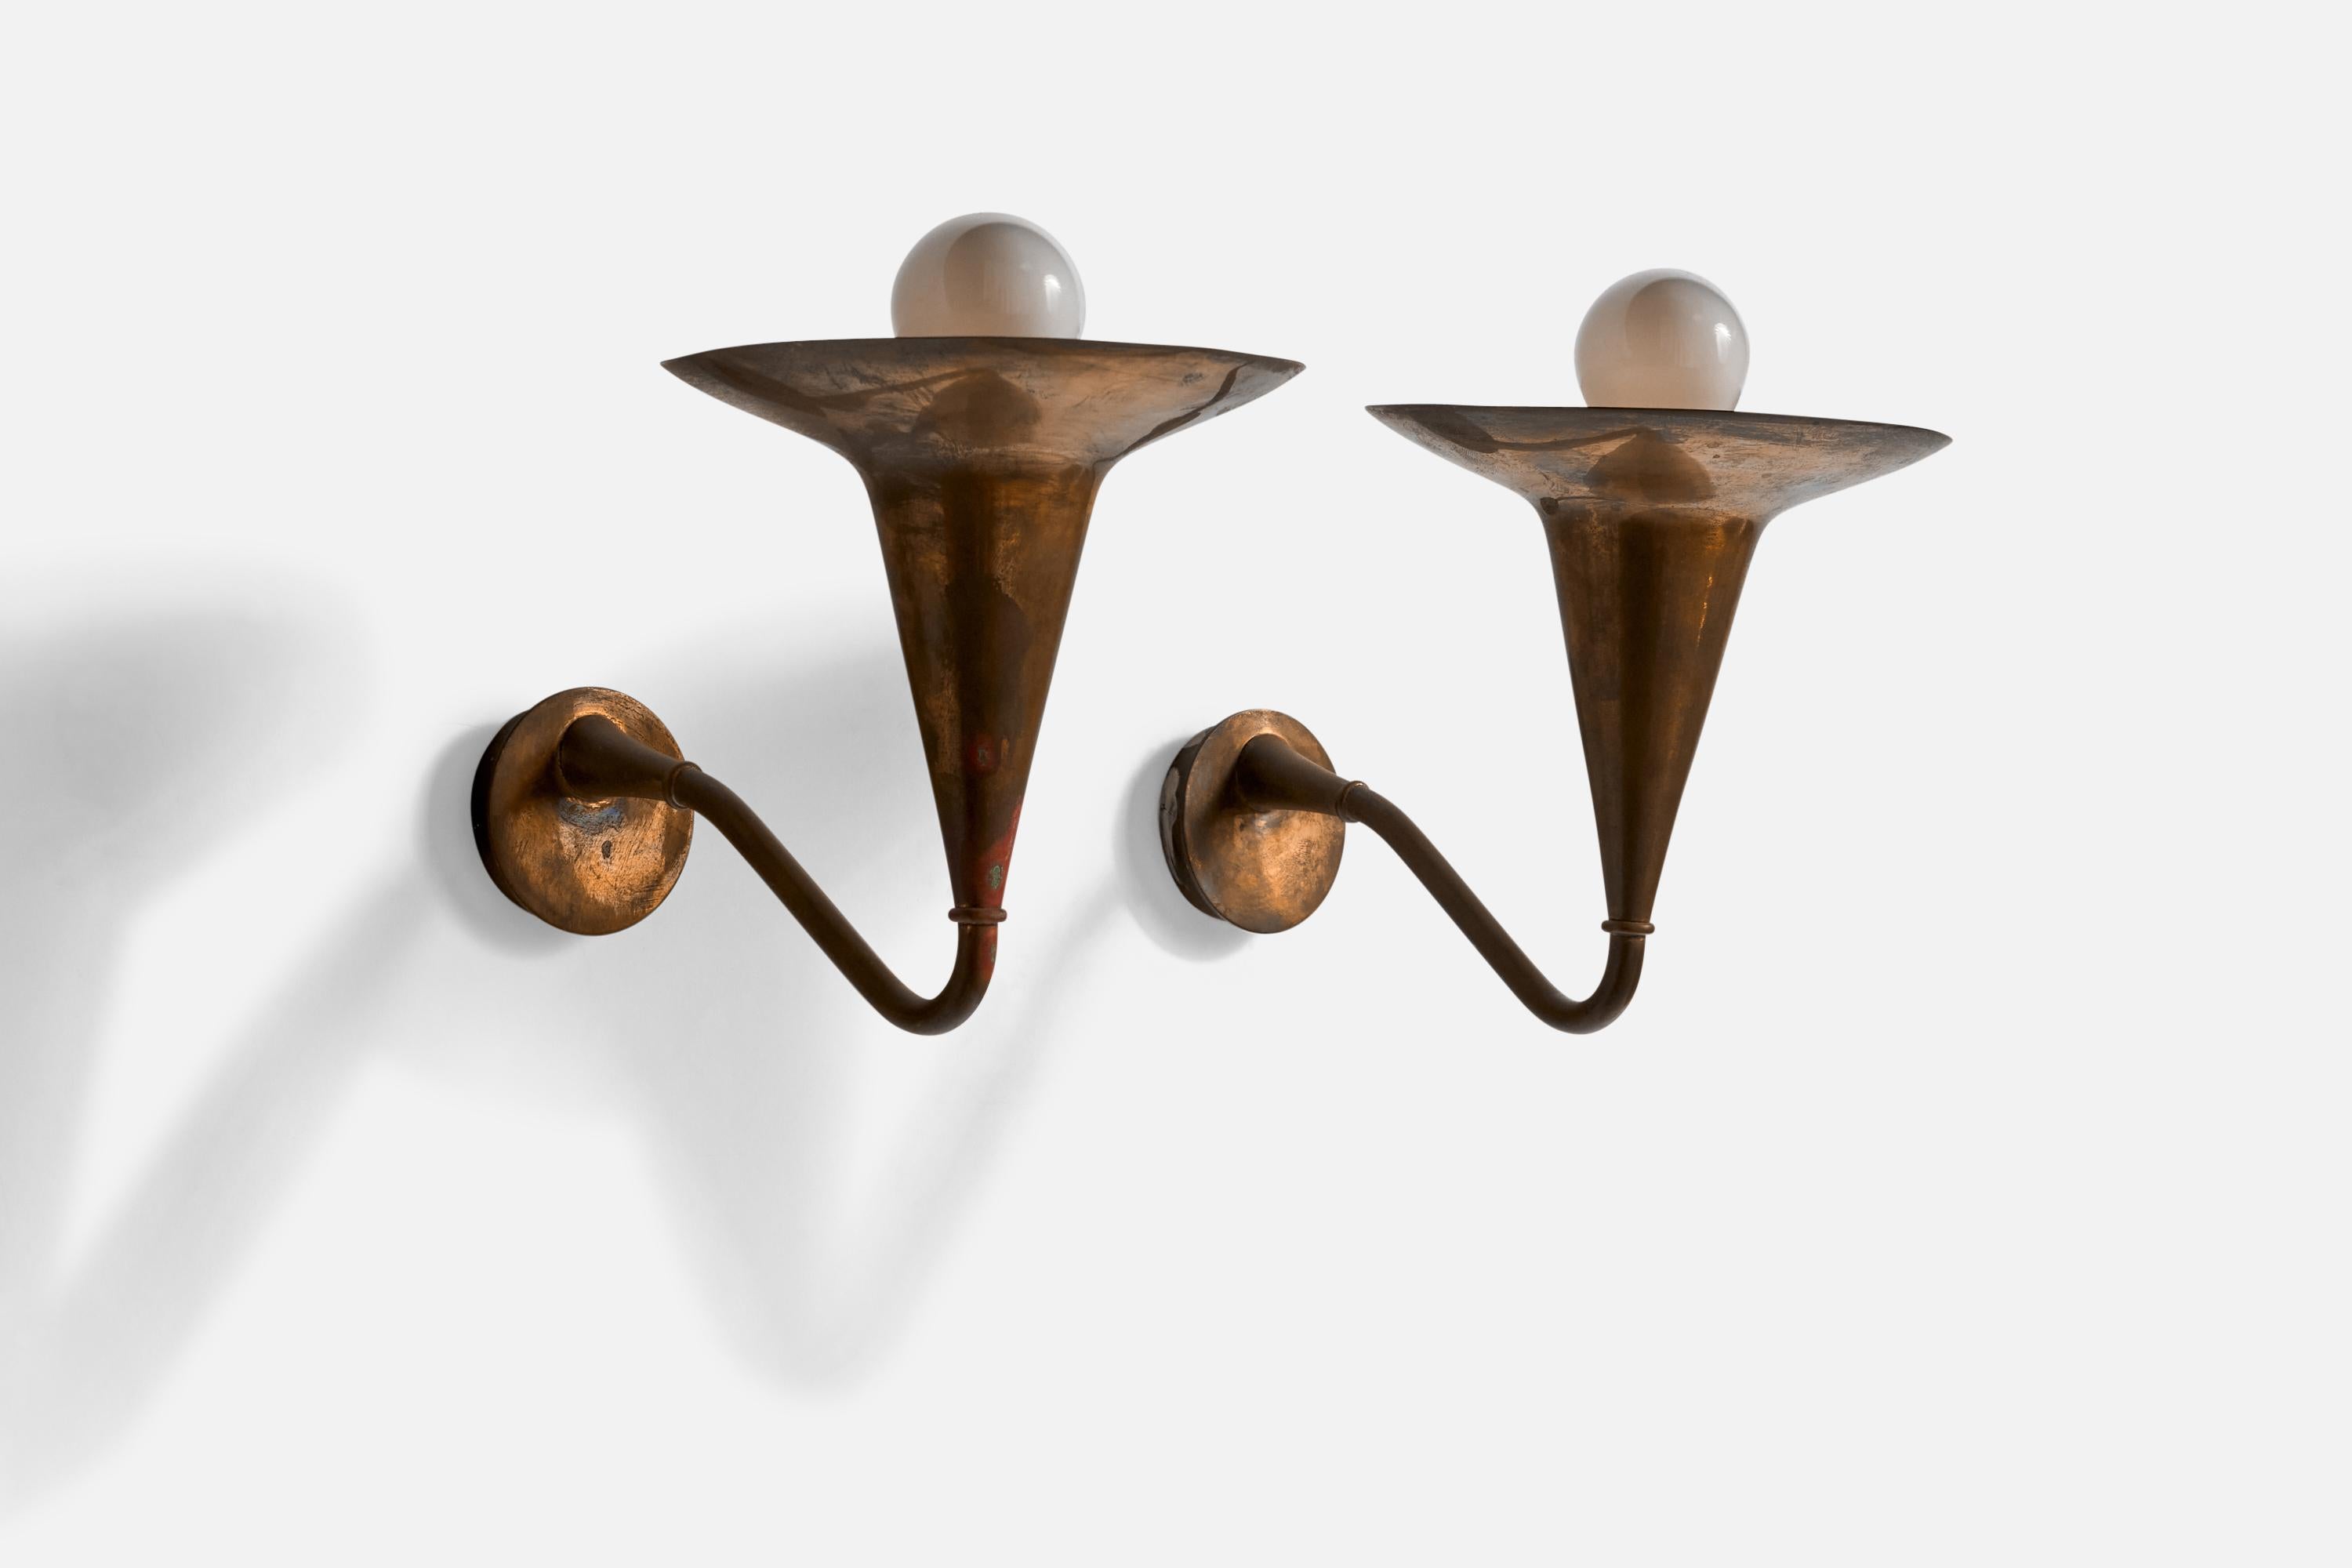 A pair of copper wall lights designed and produced in Italy, 1940s.

Overall Dimensions (inches): 6.5” H x 6” W x 10” D
Back Plate Dimensions (inches): 2.25” H x 2.25” W x .50” D
Bulb Specifications: E-26 Bulb
Number of Sockets: 2
All lighting will